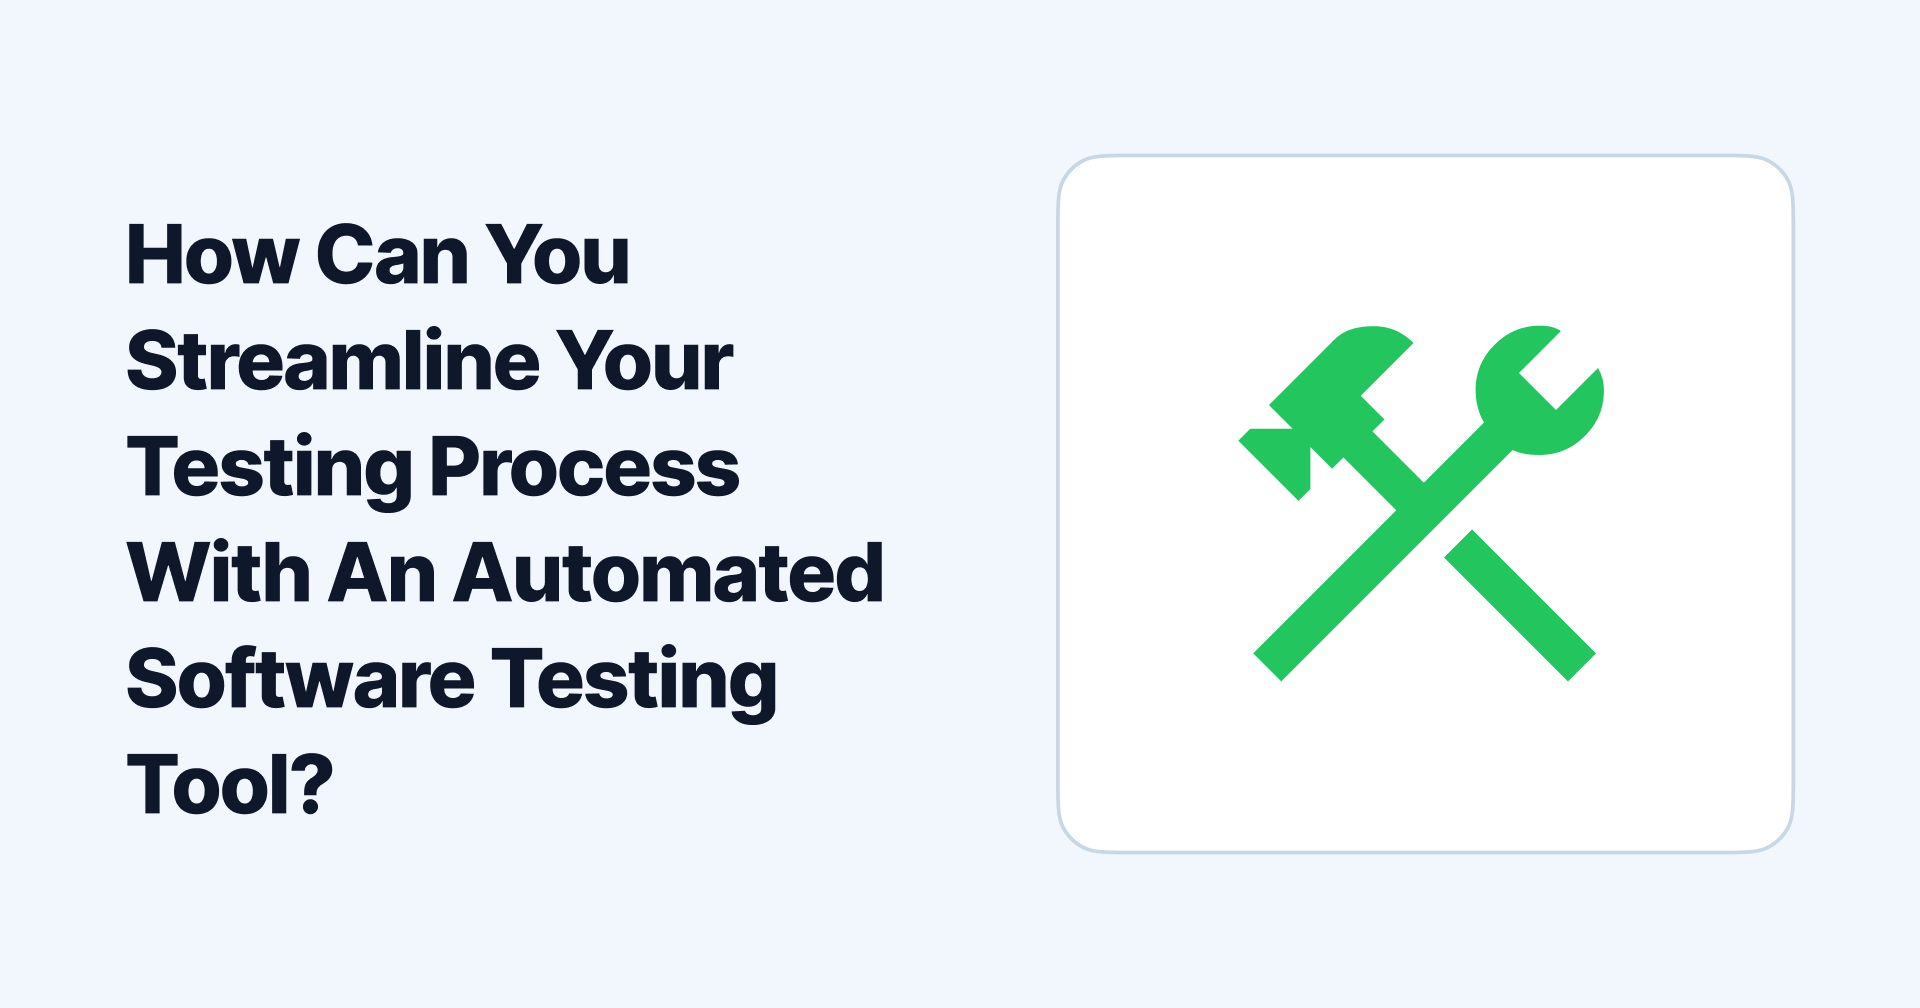 How Can You Streamline Your Testing Process With An Automated Software Testing Tool?